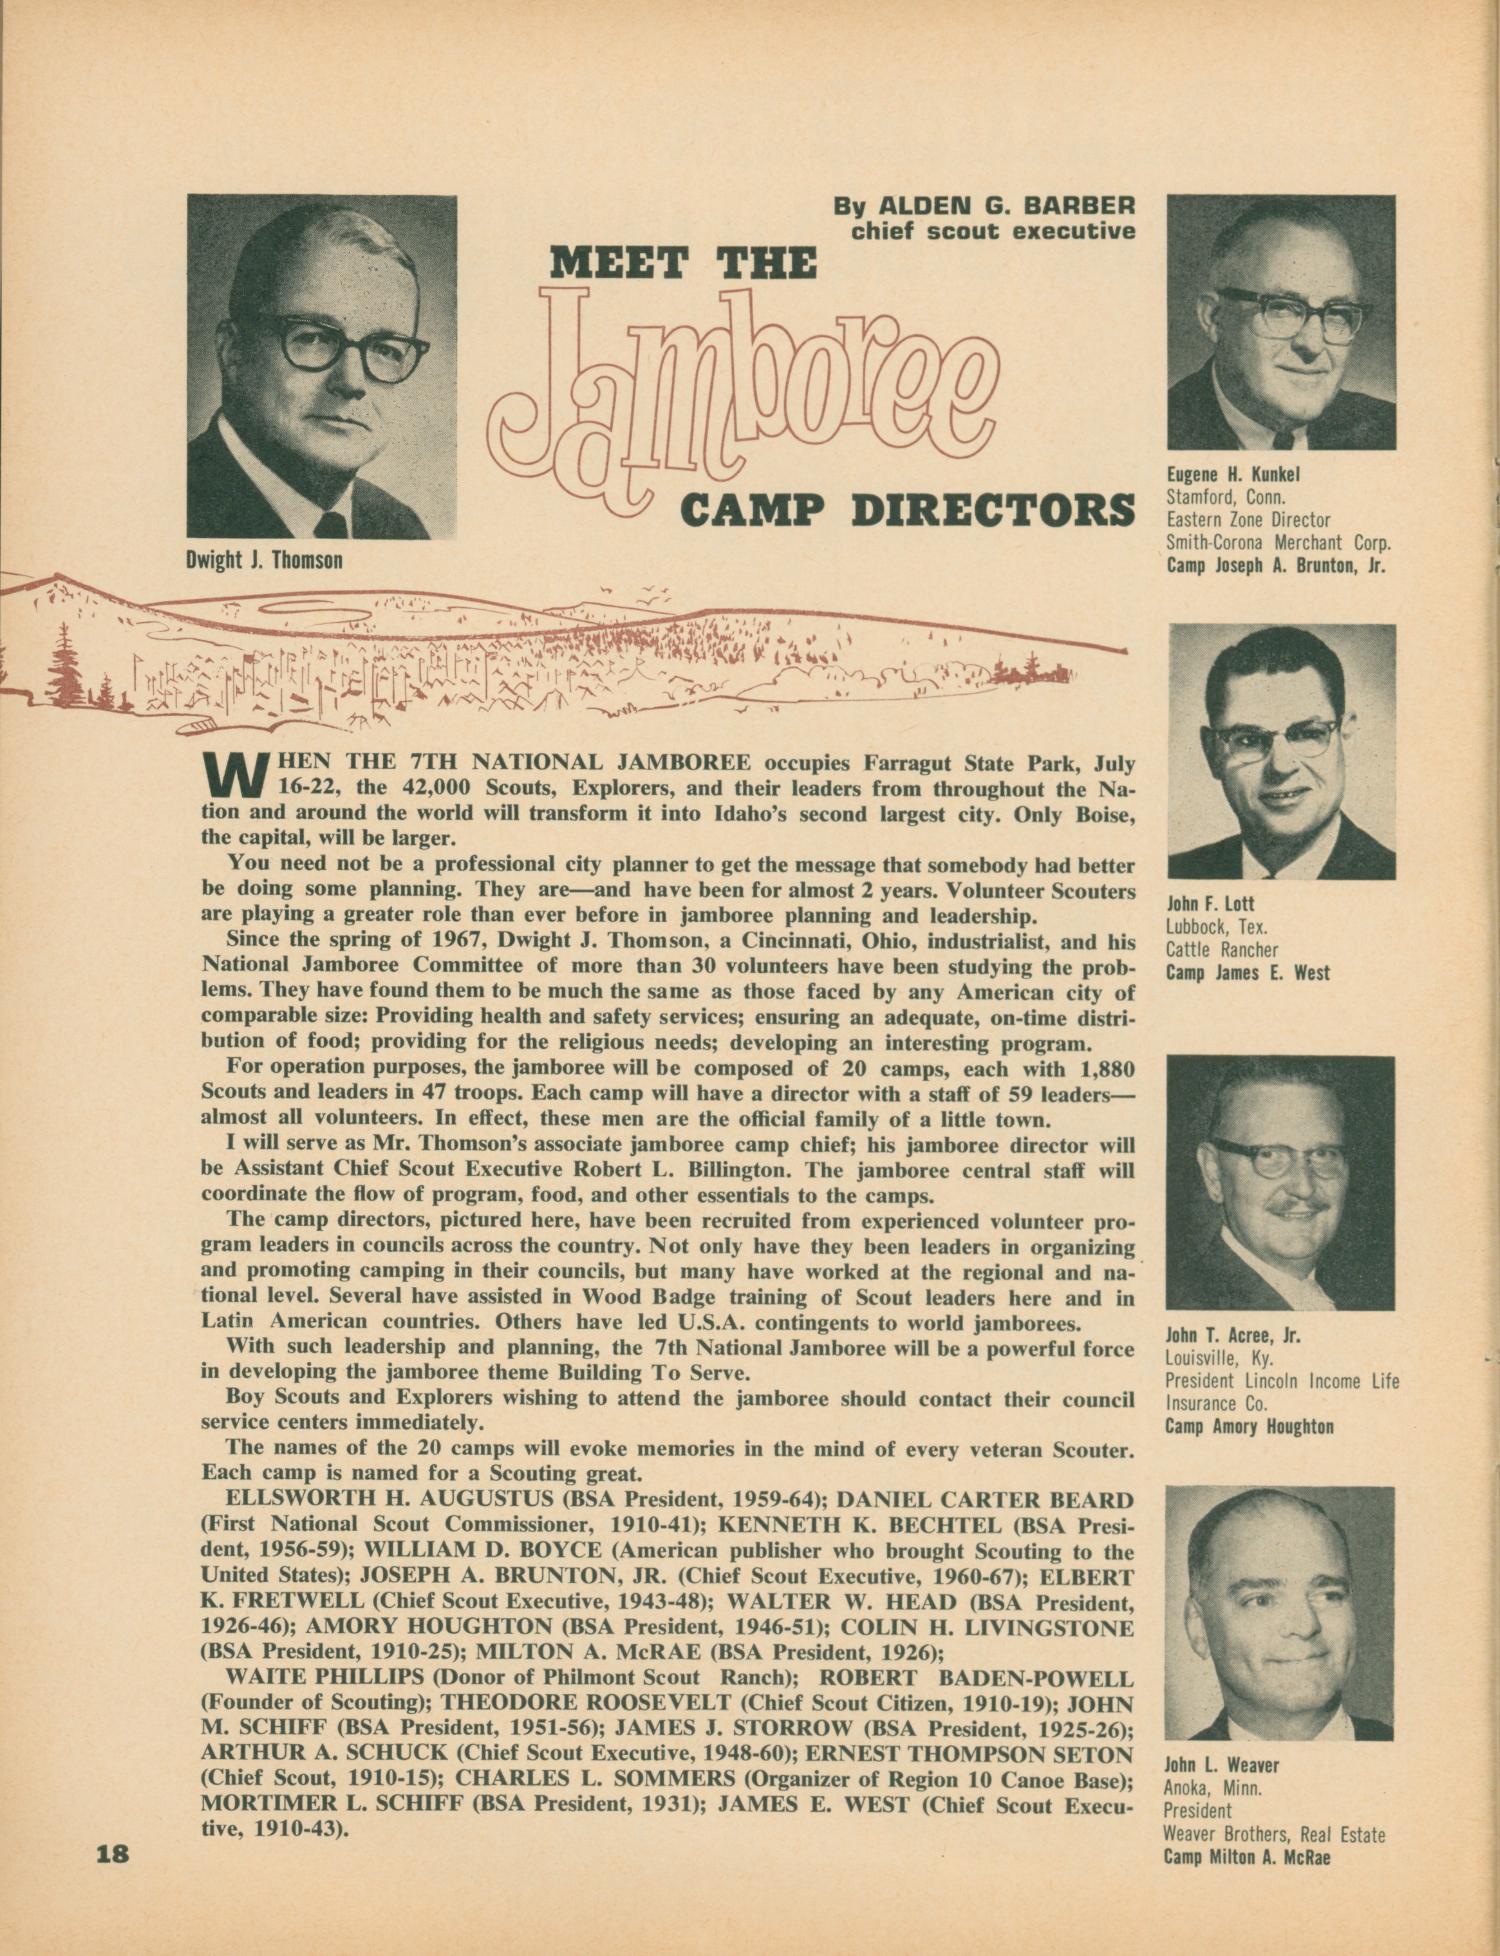 Scouting, Volume 57, Number 2, February 1969
                                                
                                                    18
                                                